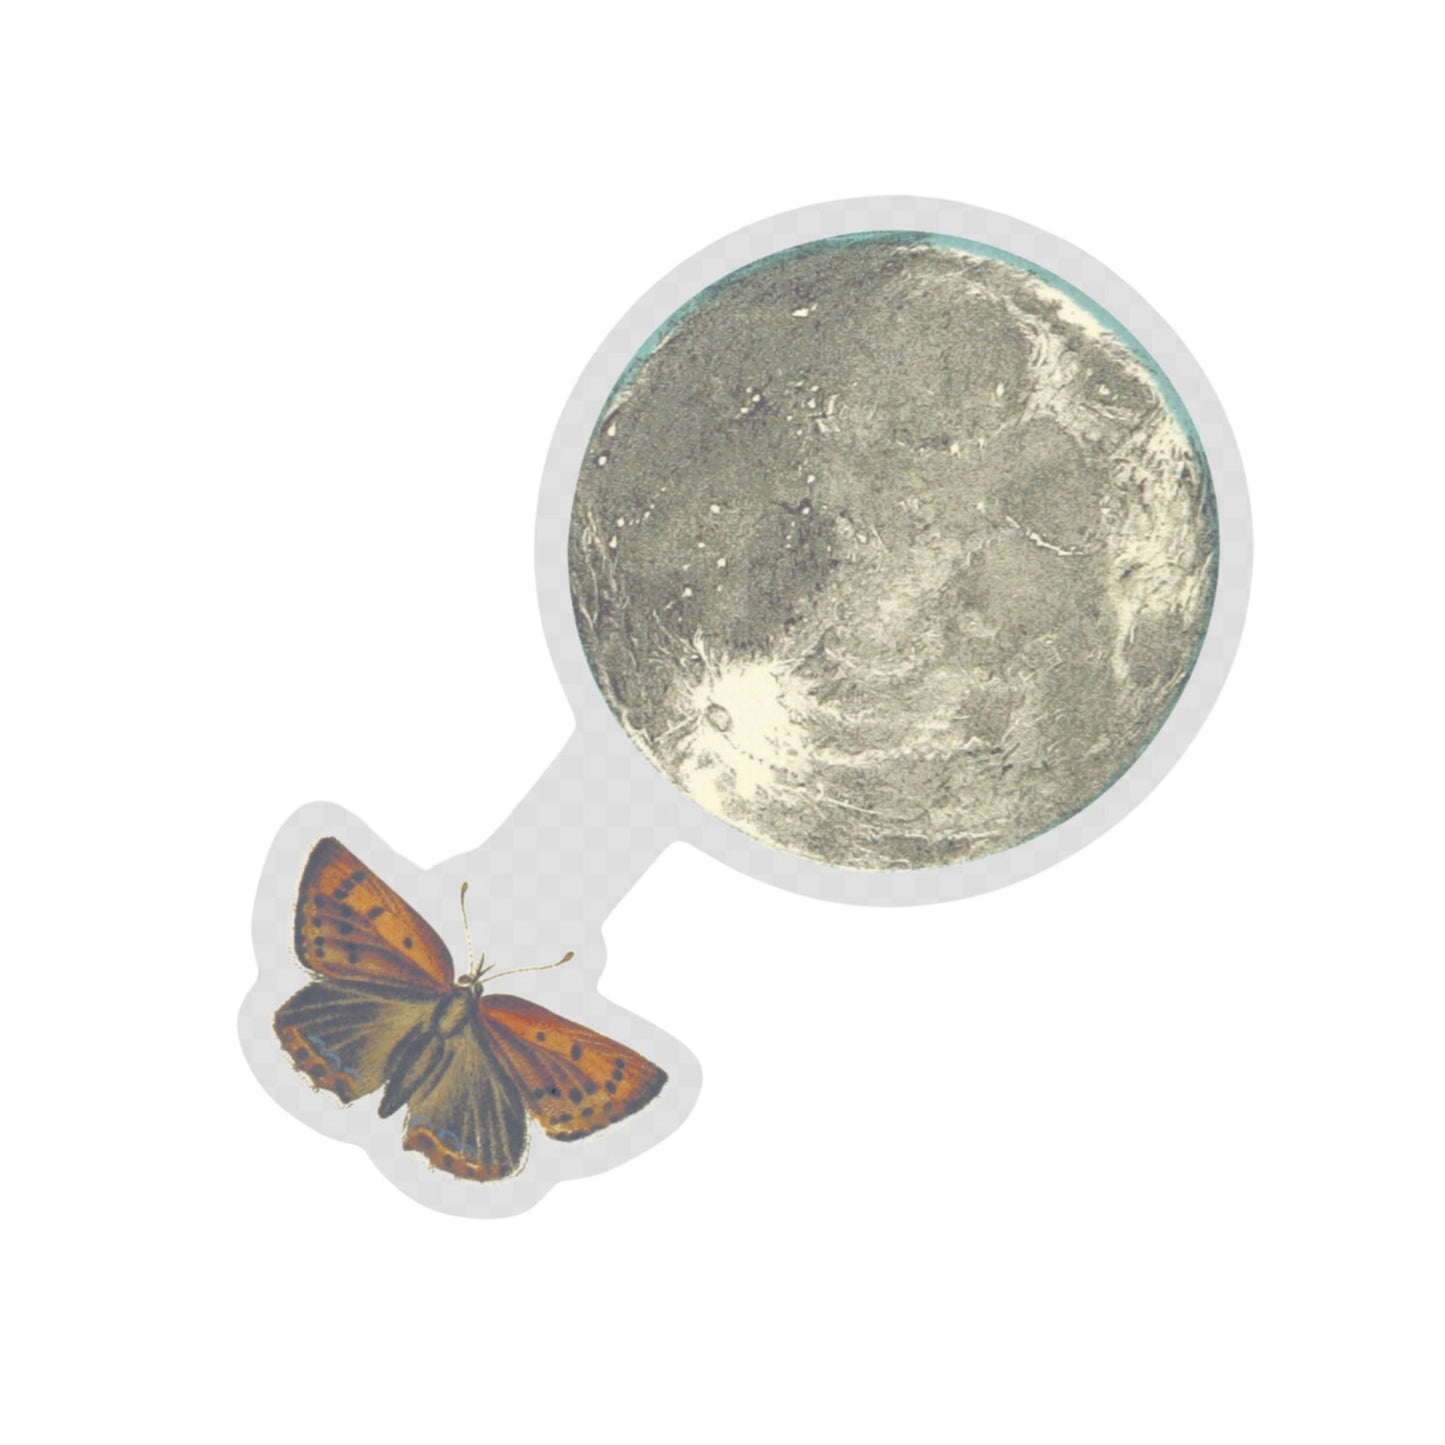 Moth and Moon Transparent Sticker for Dark Surfaces | Spooky Clear Decal for Black Water Bottles and Laptops